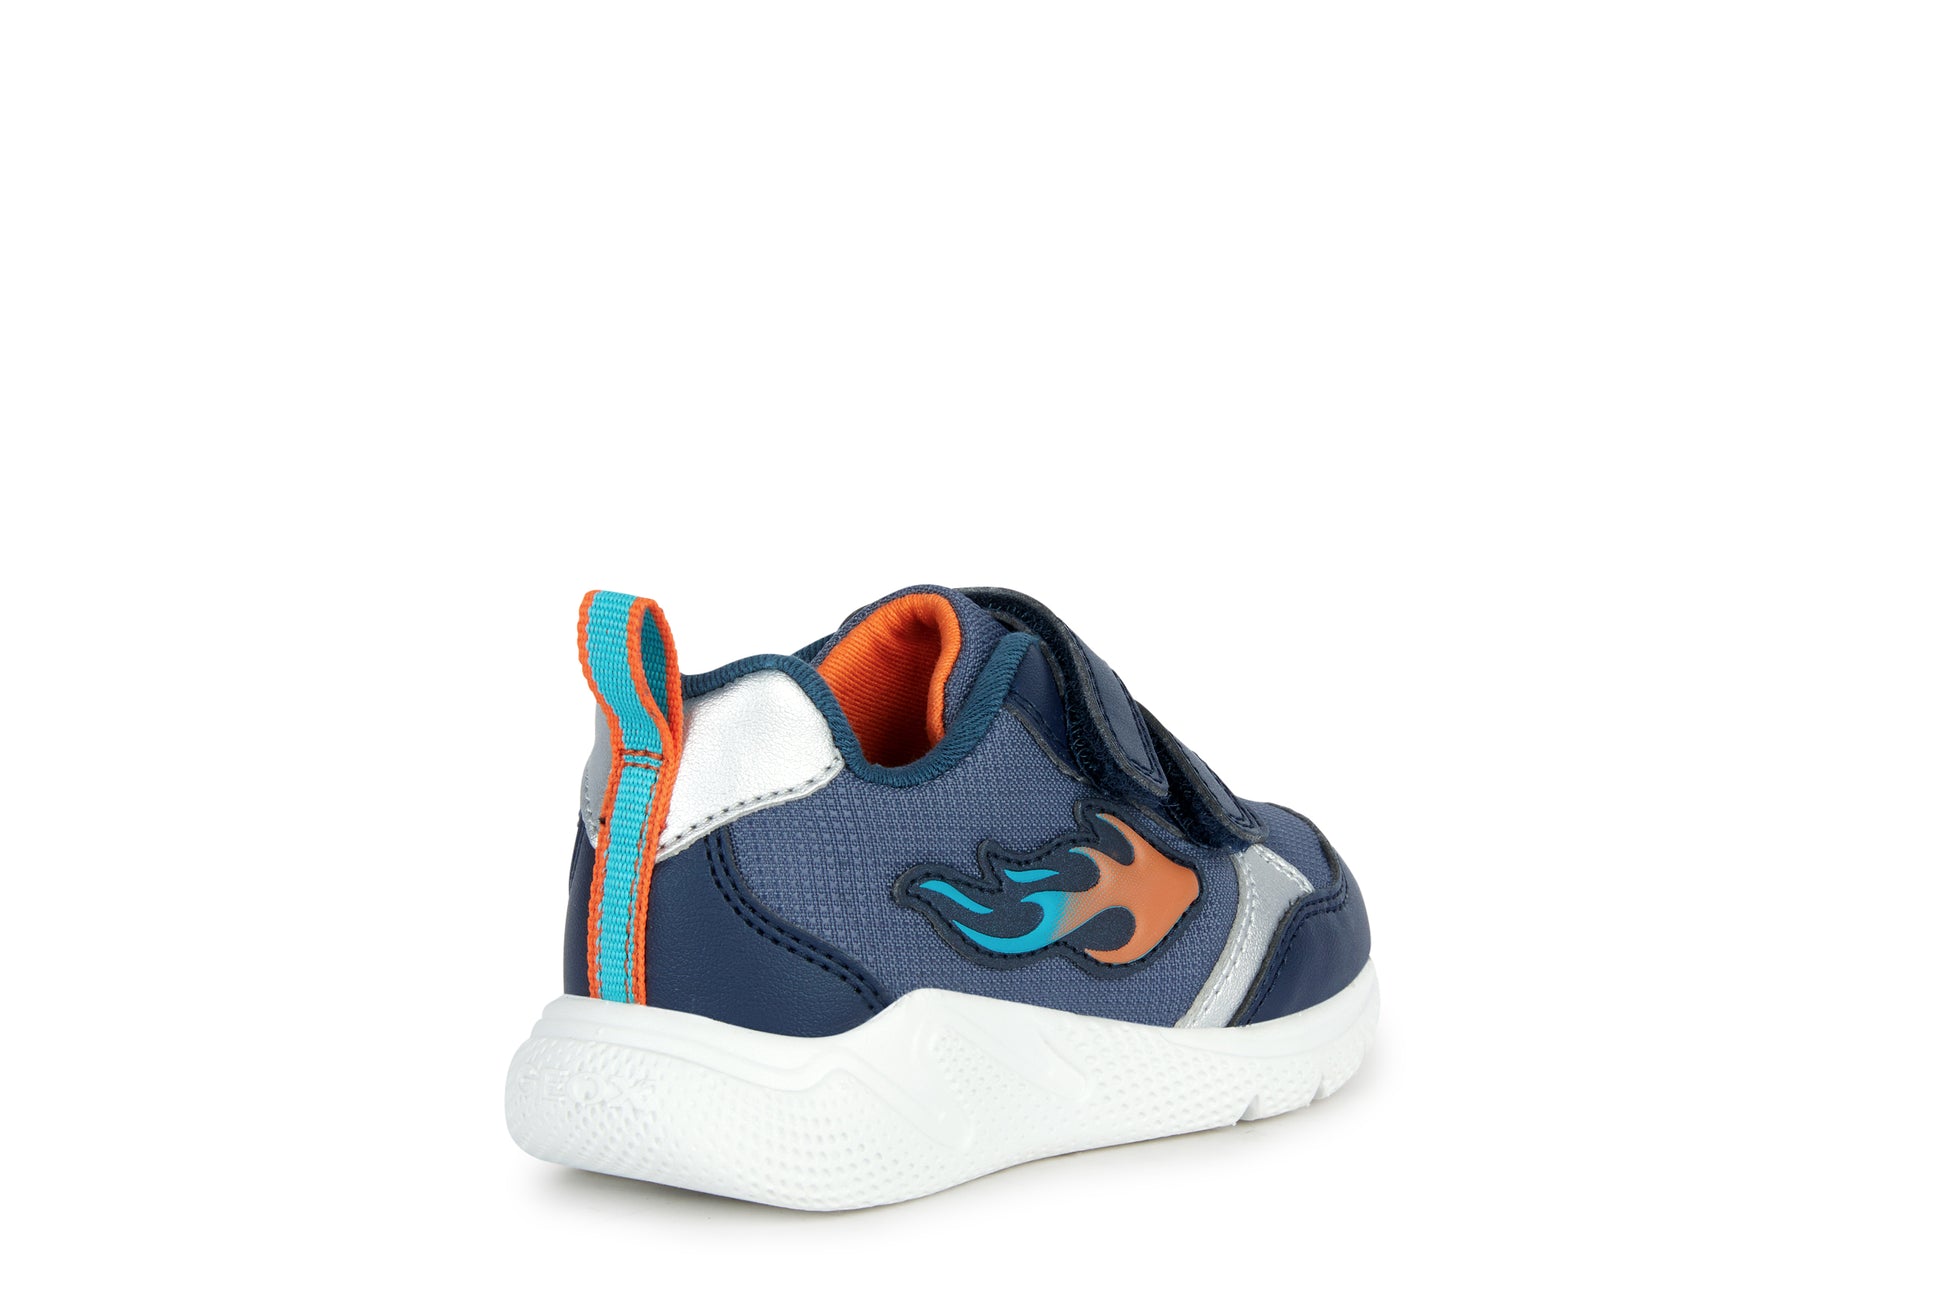 A boys trainer by Geox, style Sprintye, in navy and orange with a double velcro fastening. Rear outer side view.